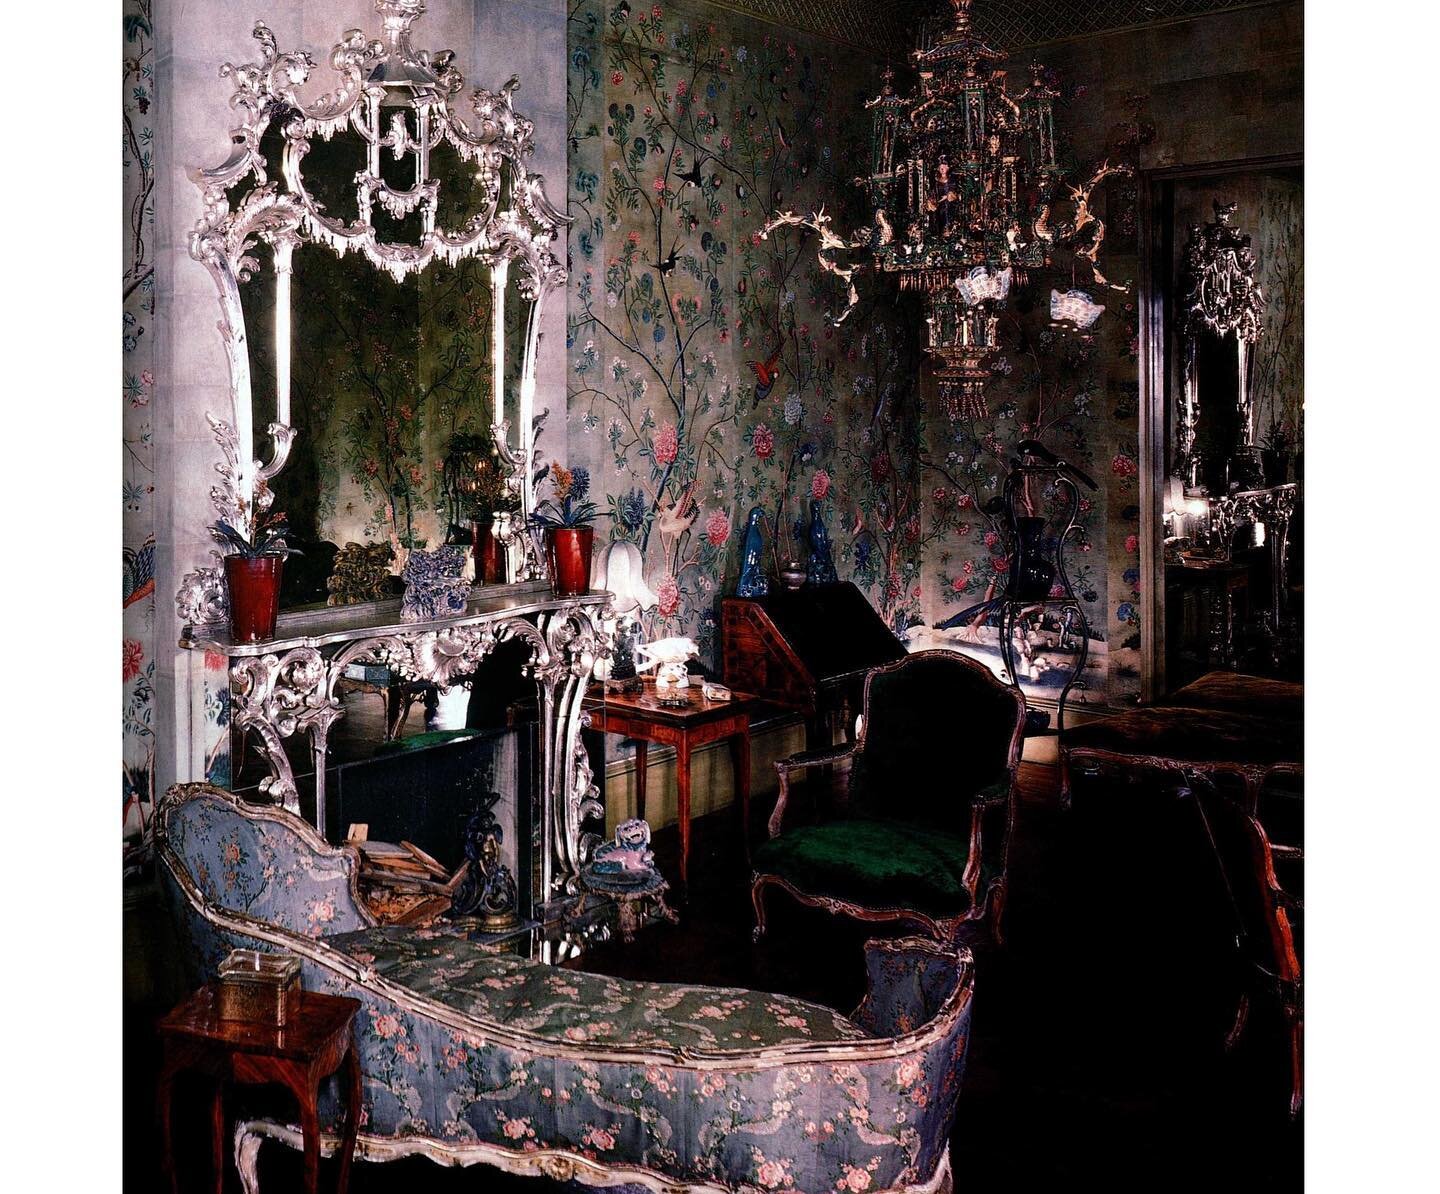 Former DC member Rose Cumming&rsquo;s (1887-1968) vibrant and eclectic Manhattan townhouse, which she decorated in 1937. In her drawing room (image 1 and 2), 18th-century hand-painted Chinese wallpaper, Louis XV furniture, and a Venetian chinoiserie 